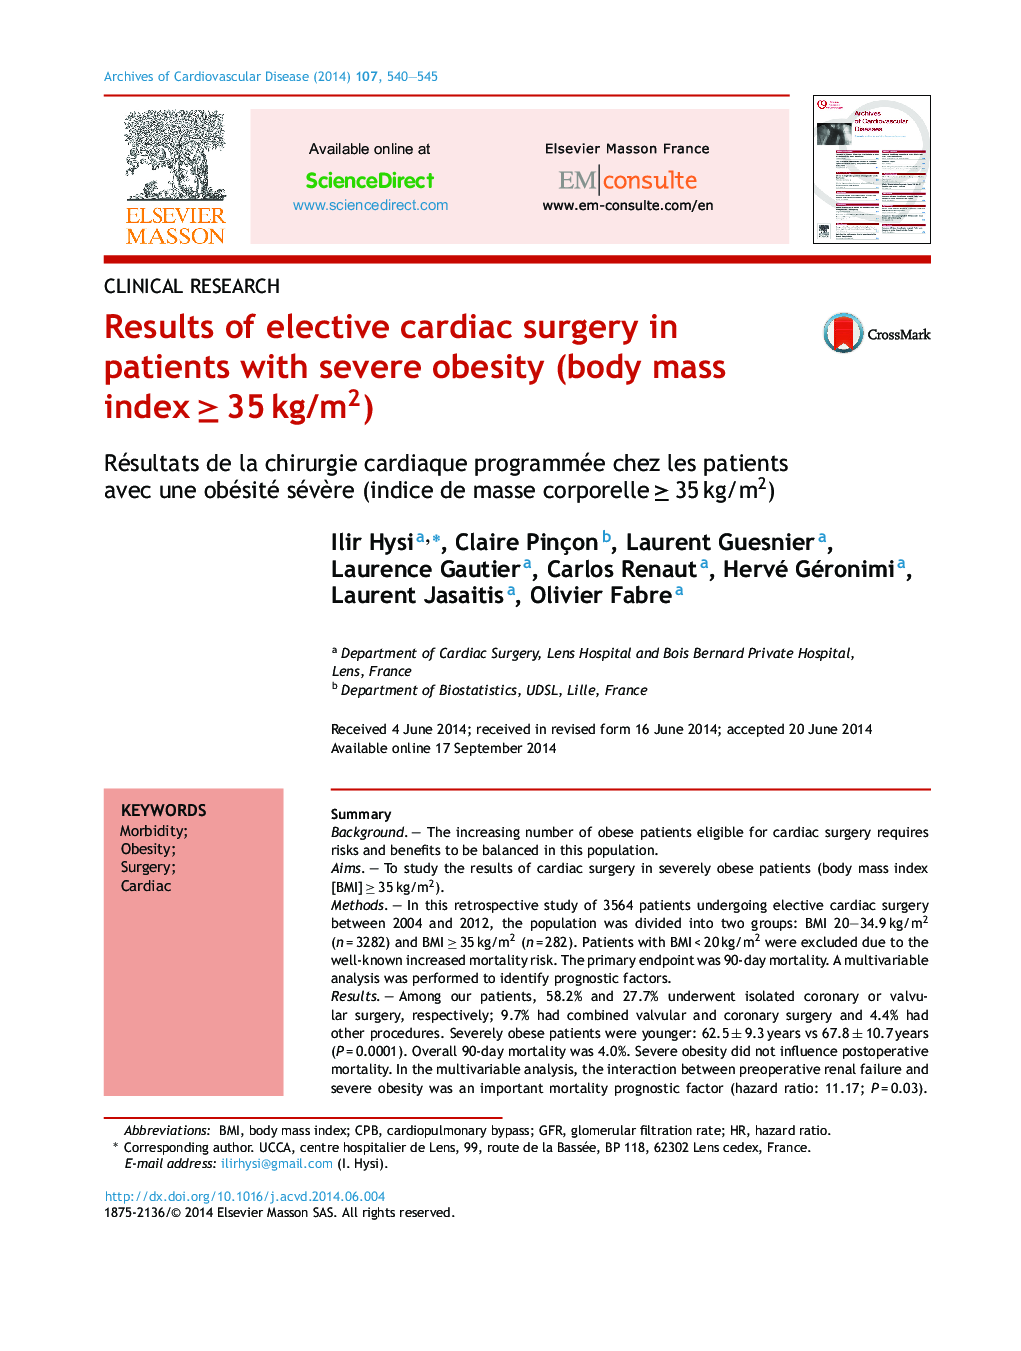 Results of elective cardiac surgery in patients with severe obesity (body mass index ≥ 35 kg/m2)